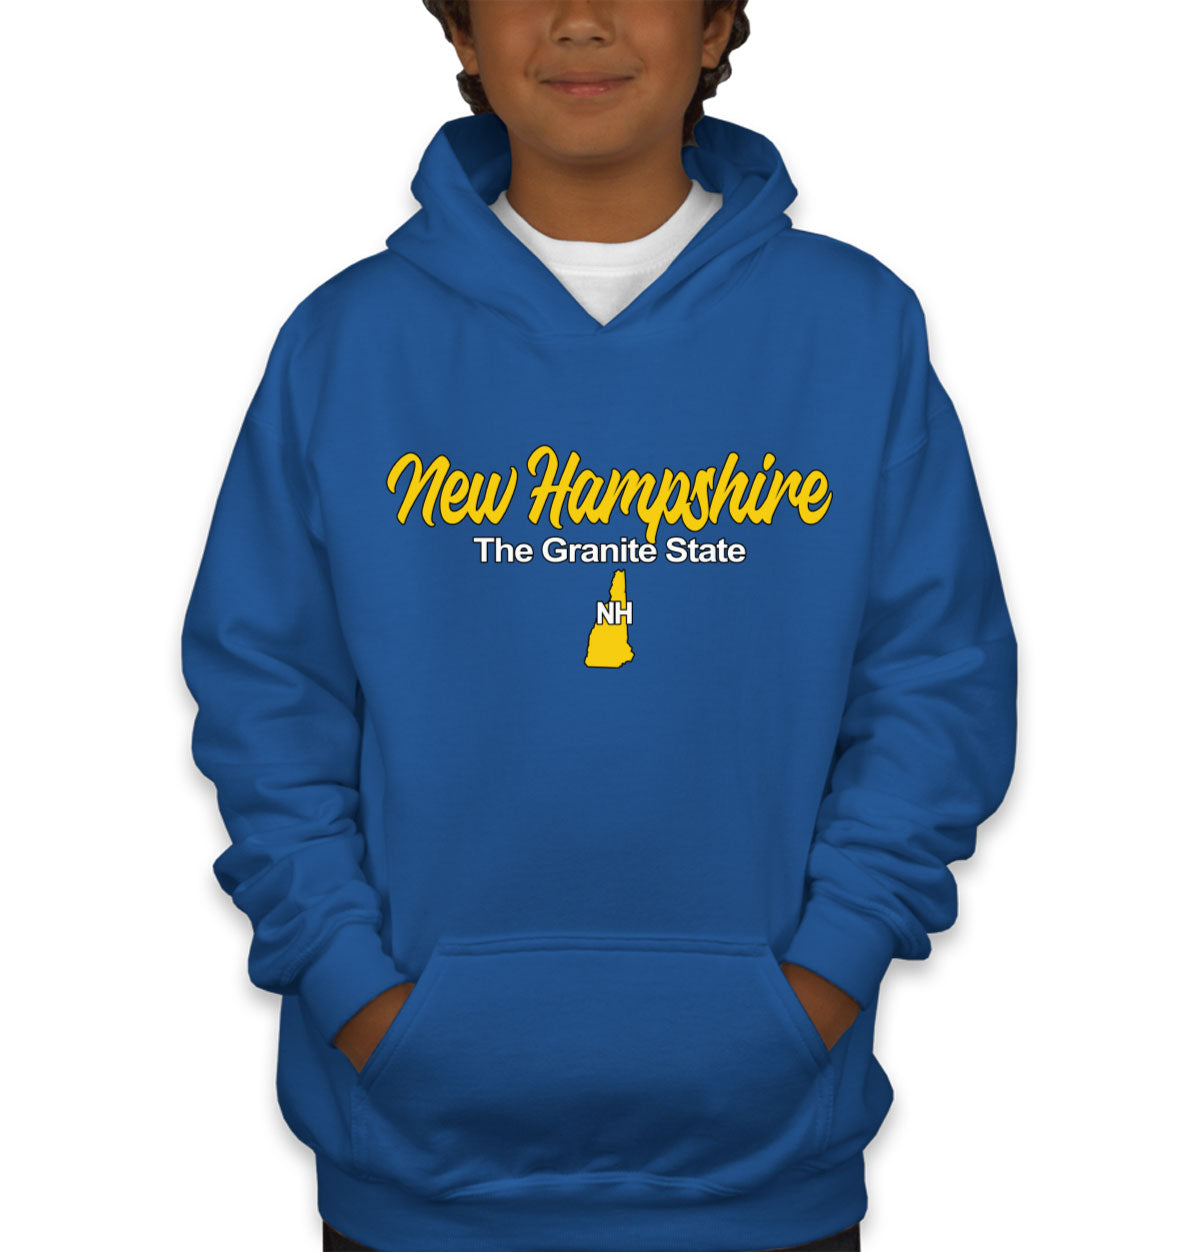 New Hampshire The Granite State Youth Hoodie